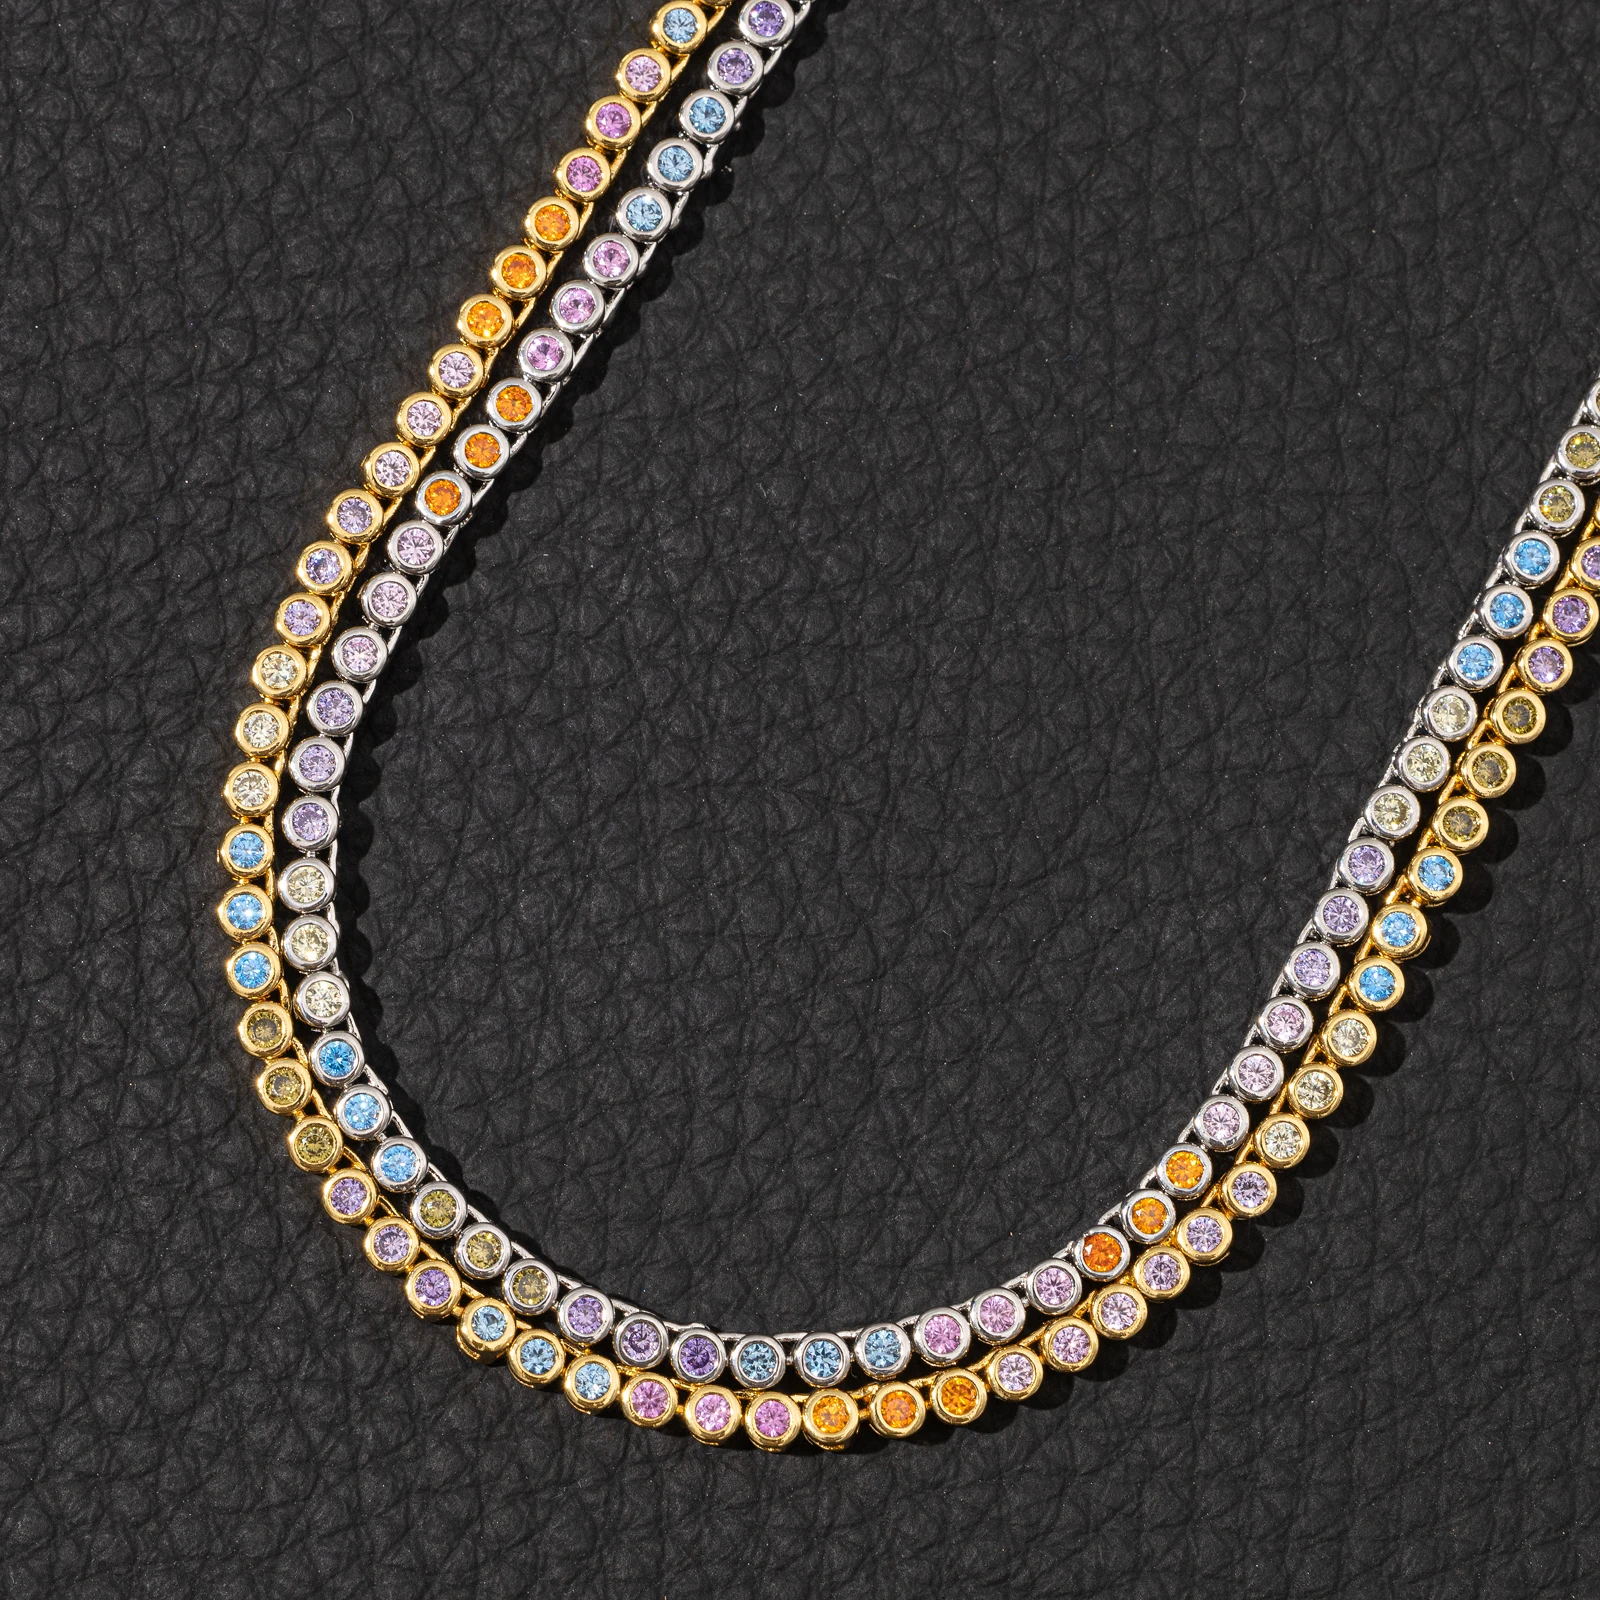 Top Icy Rainbow Color 3mm Tennis Chain Fashion Jewelry Necklace Brass 18K Gold Plated 3A CZ Shiny Necklace Women Chain